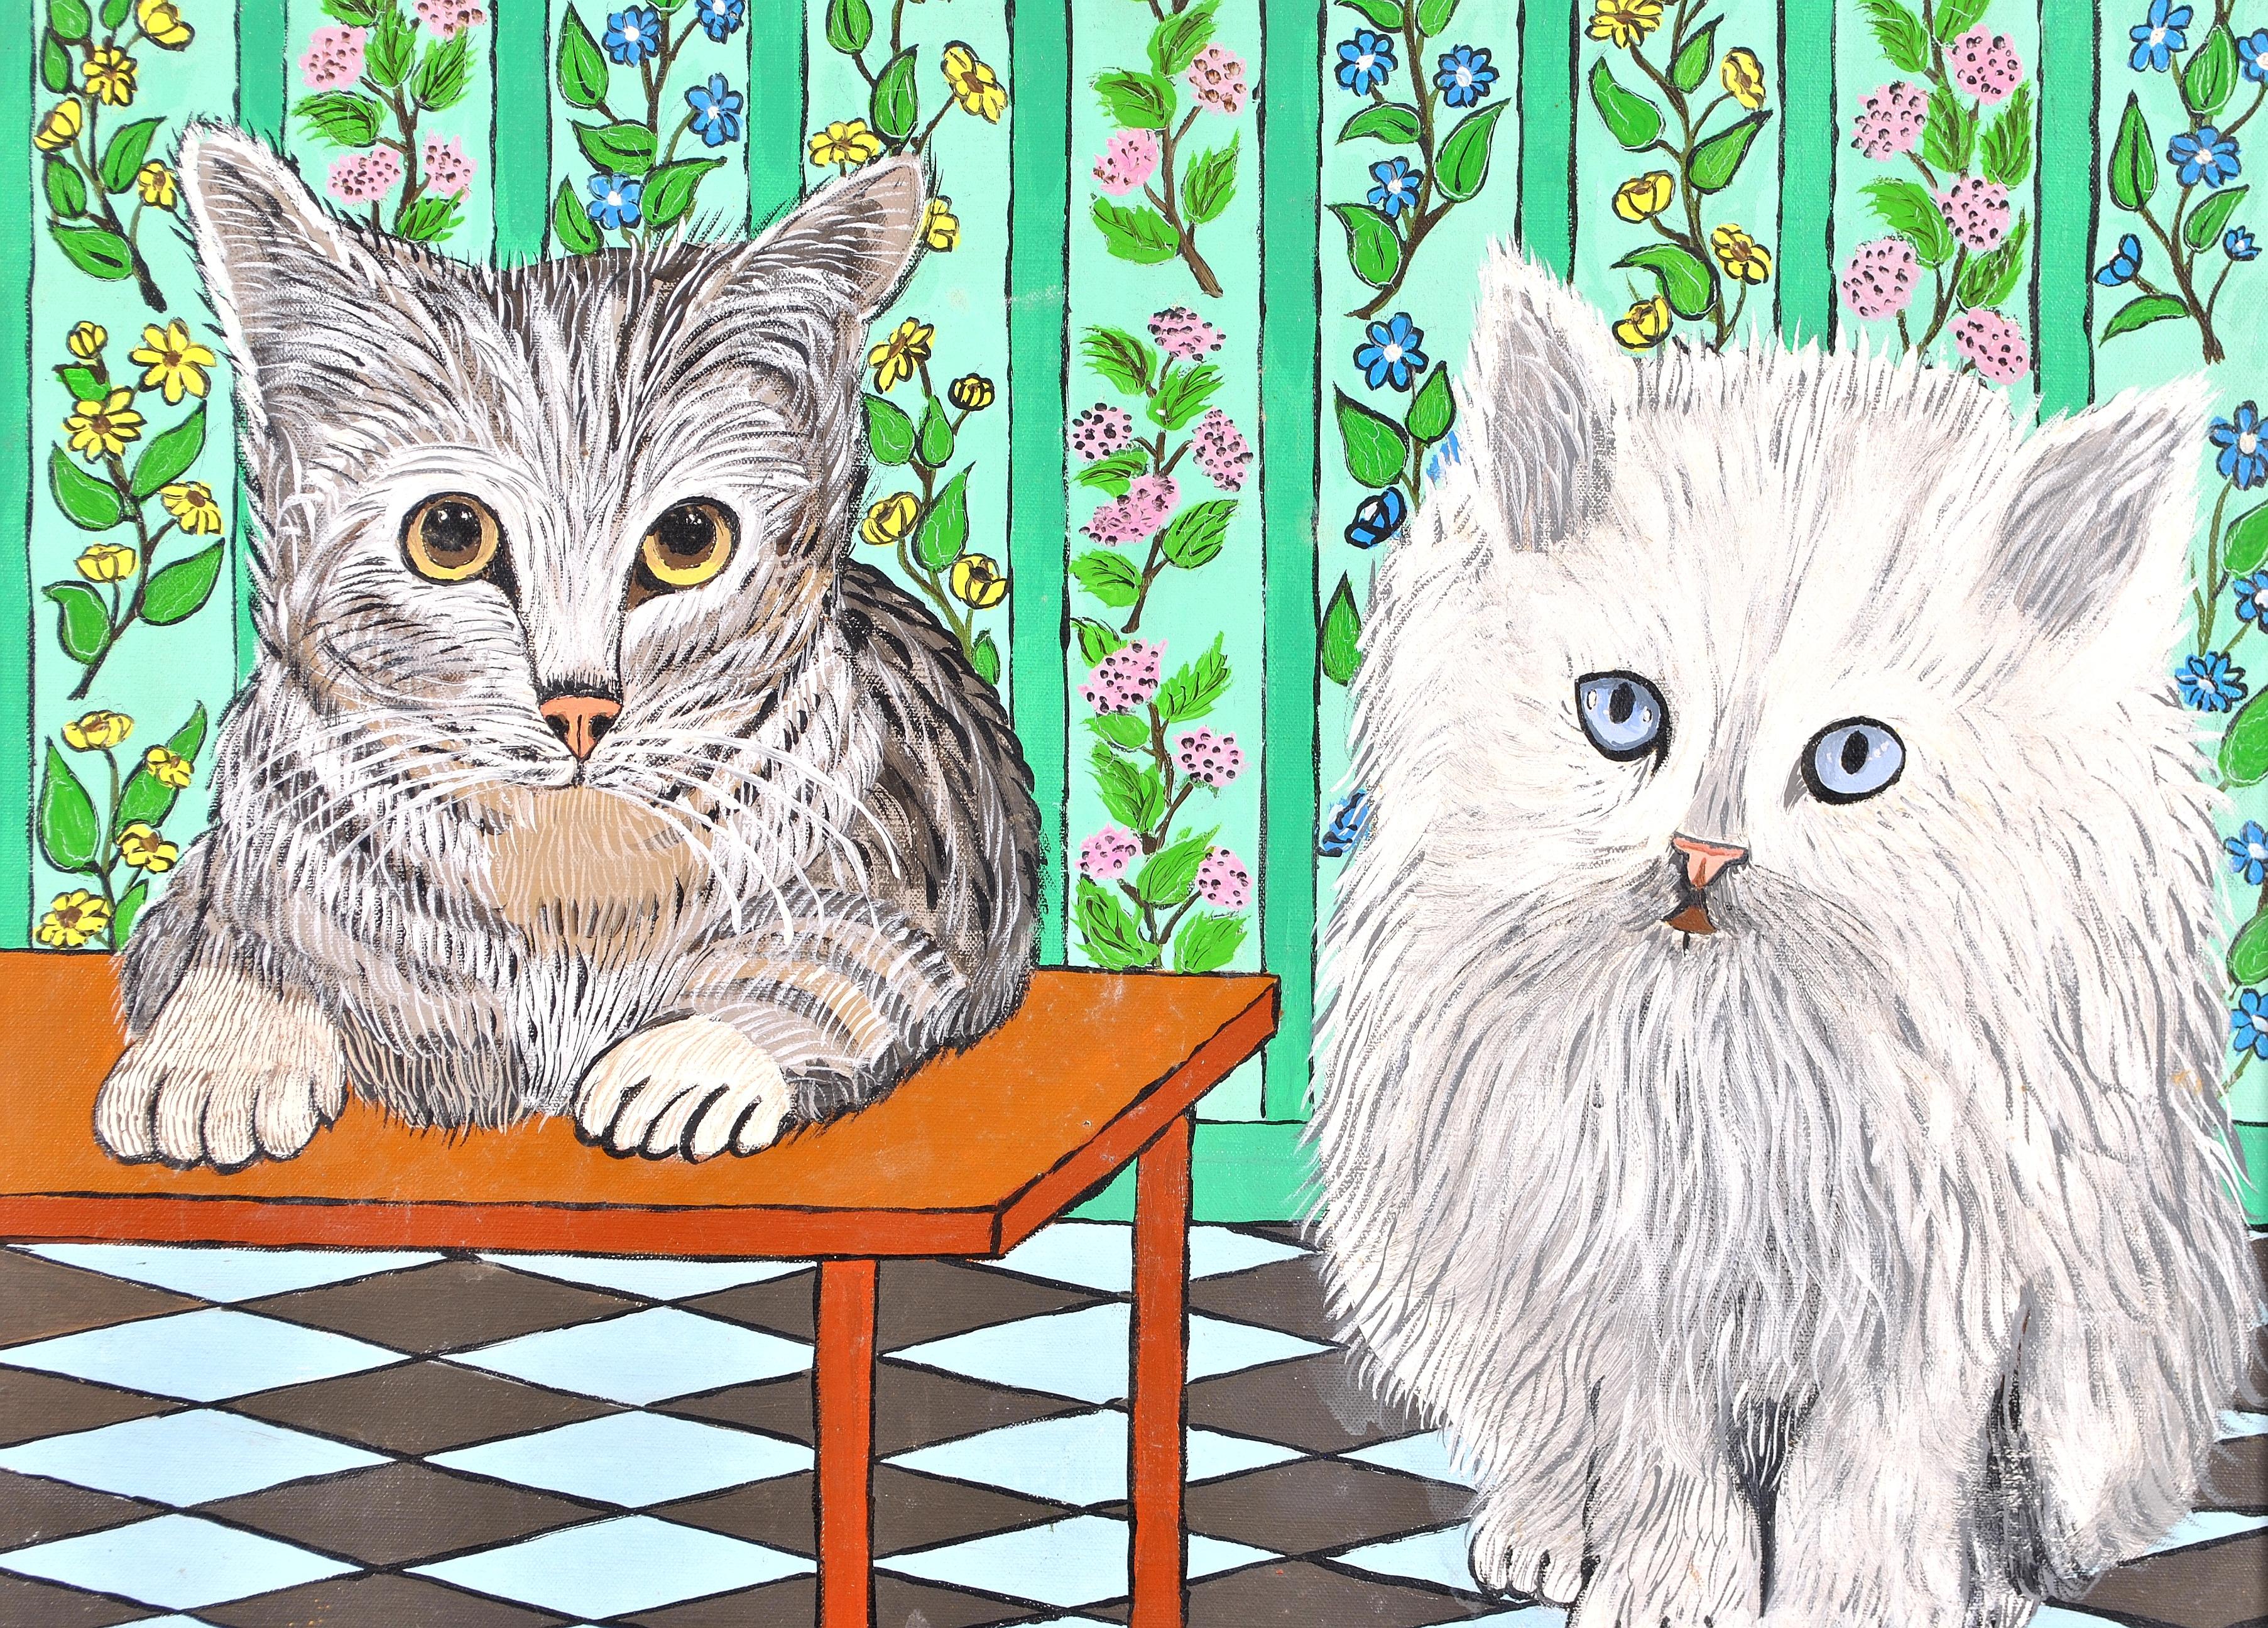 Cats Waiting on a Snack - Mid 20th Century French Naïf Interior Animal Painting For Sale 4